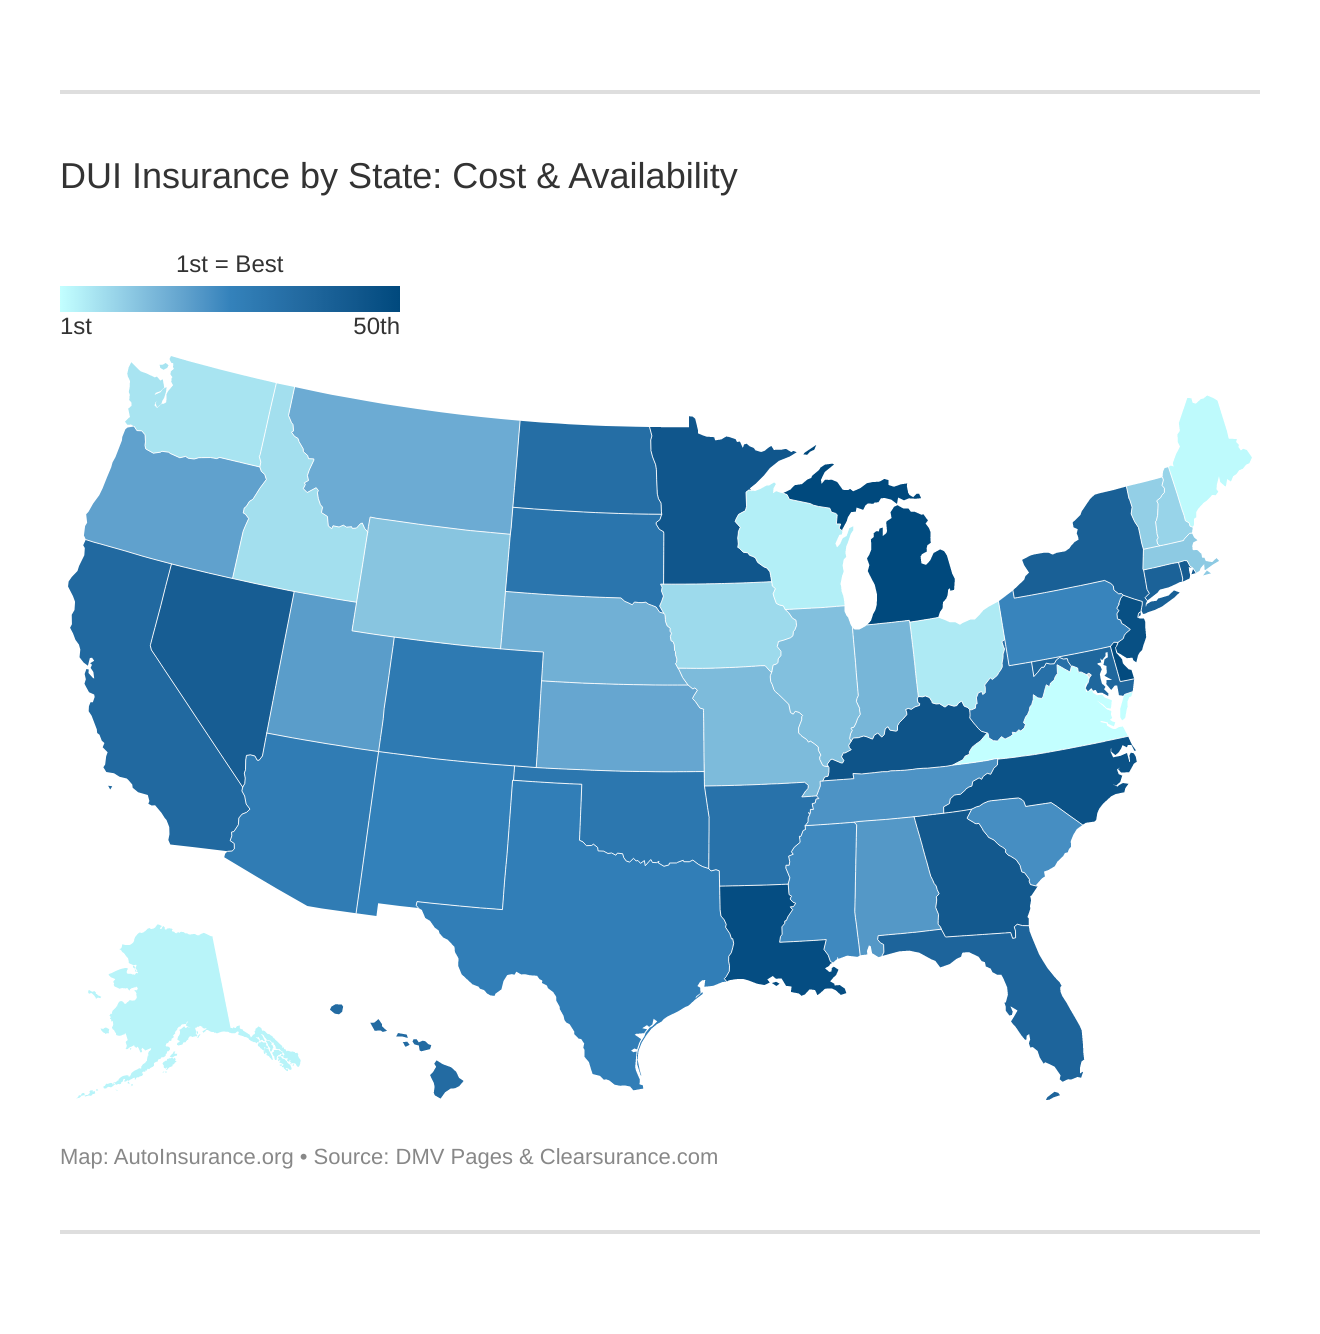 DUI Insurance by State: Cost & Availability